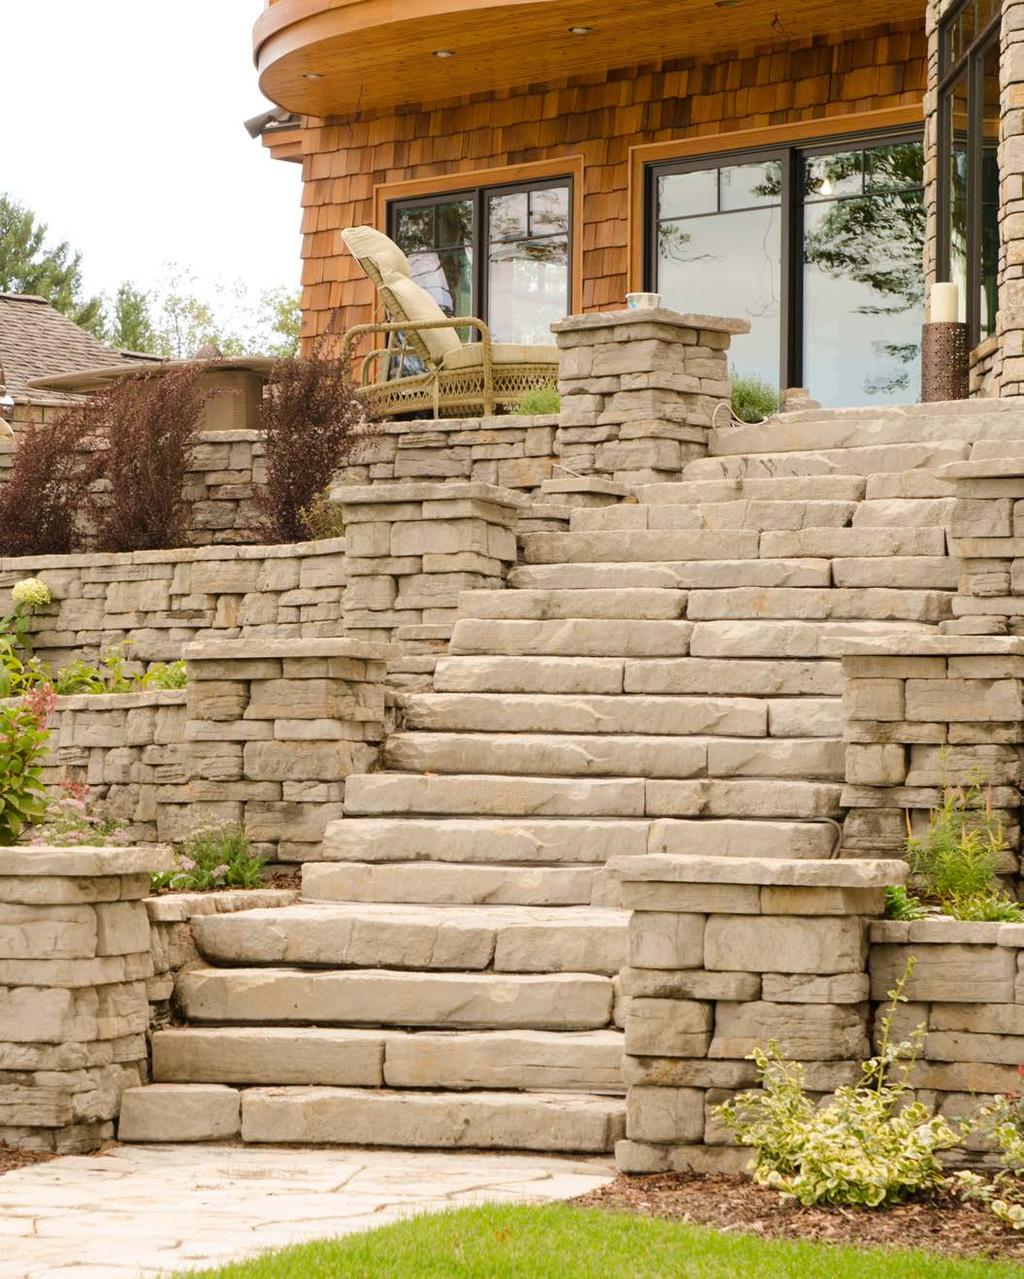 CONTENTS Outcropping...2 Rockton...4 Belvedere...6 Firepit Kits...8 Belvedere & Dimensional Firepit...8 Dimensional Wall...9 Grand Flagstone.